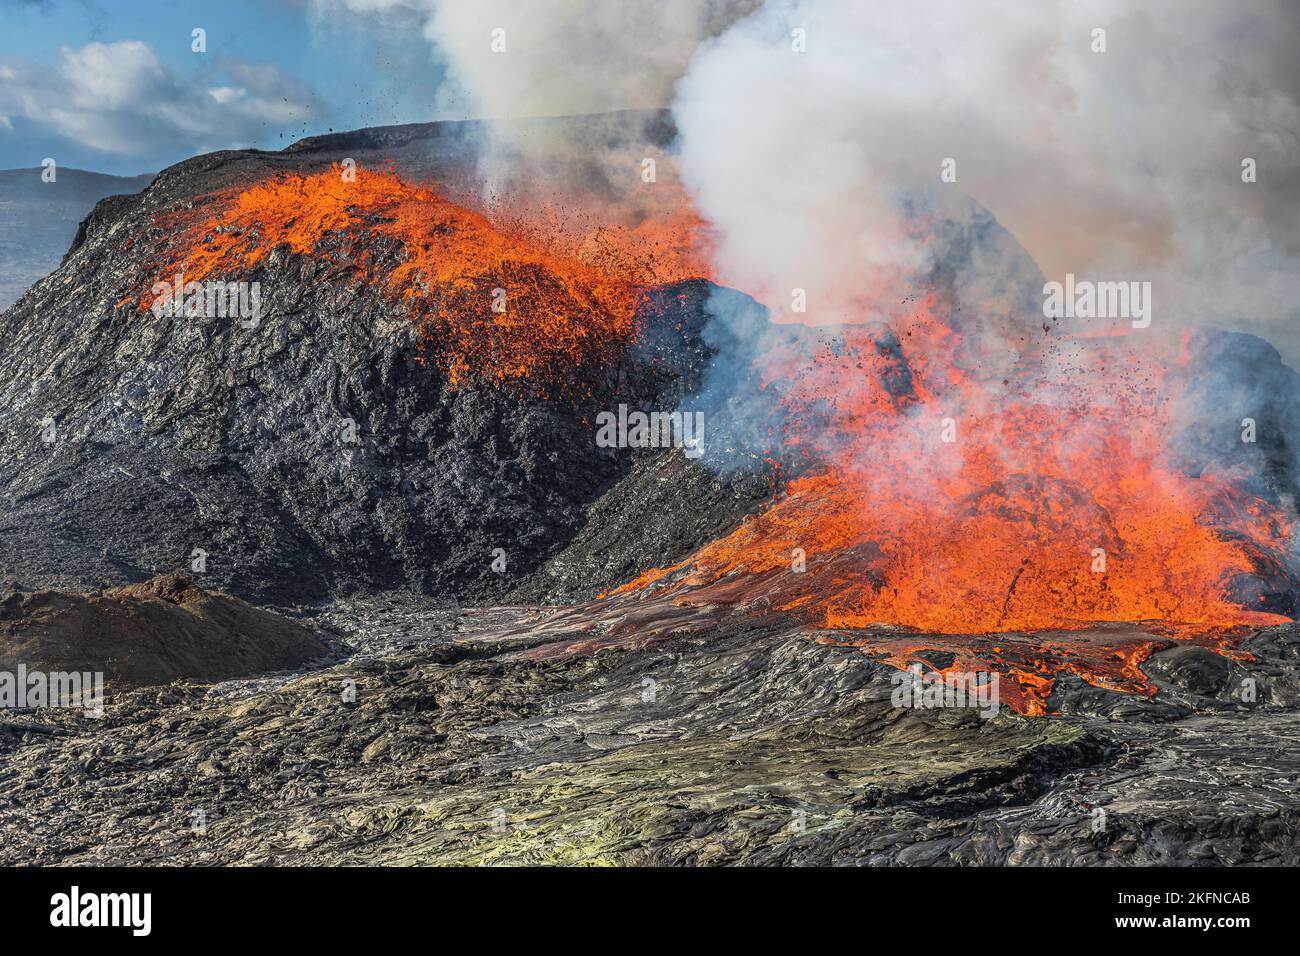 active volcano on Iceland. Eruption with lava flow from a volcanic crater on the Reykjanes peninsula. Glowing hot lava with a small fountain. Stock Photo